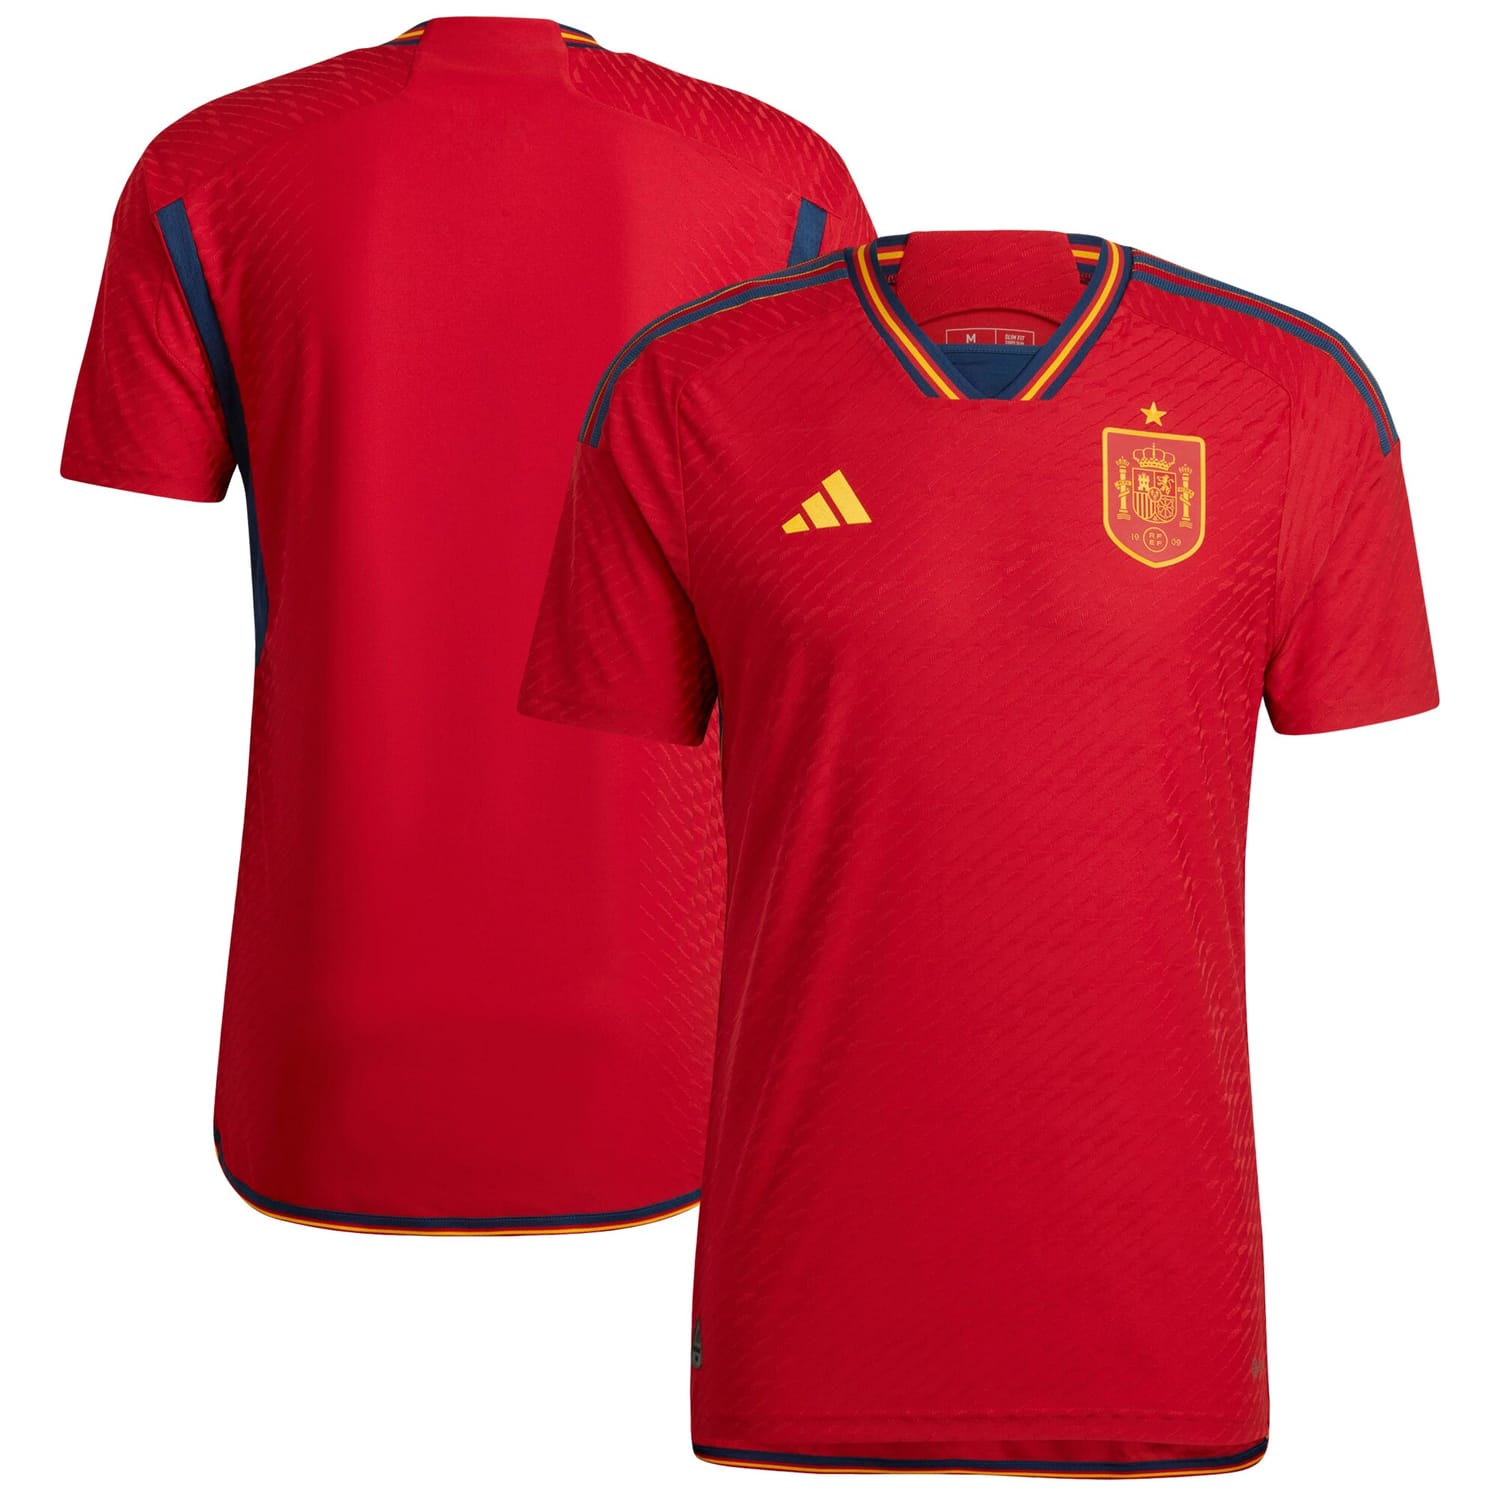 Spain National Team Home Authentic Jersey Shirt Red 2022-23 for Men